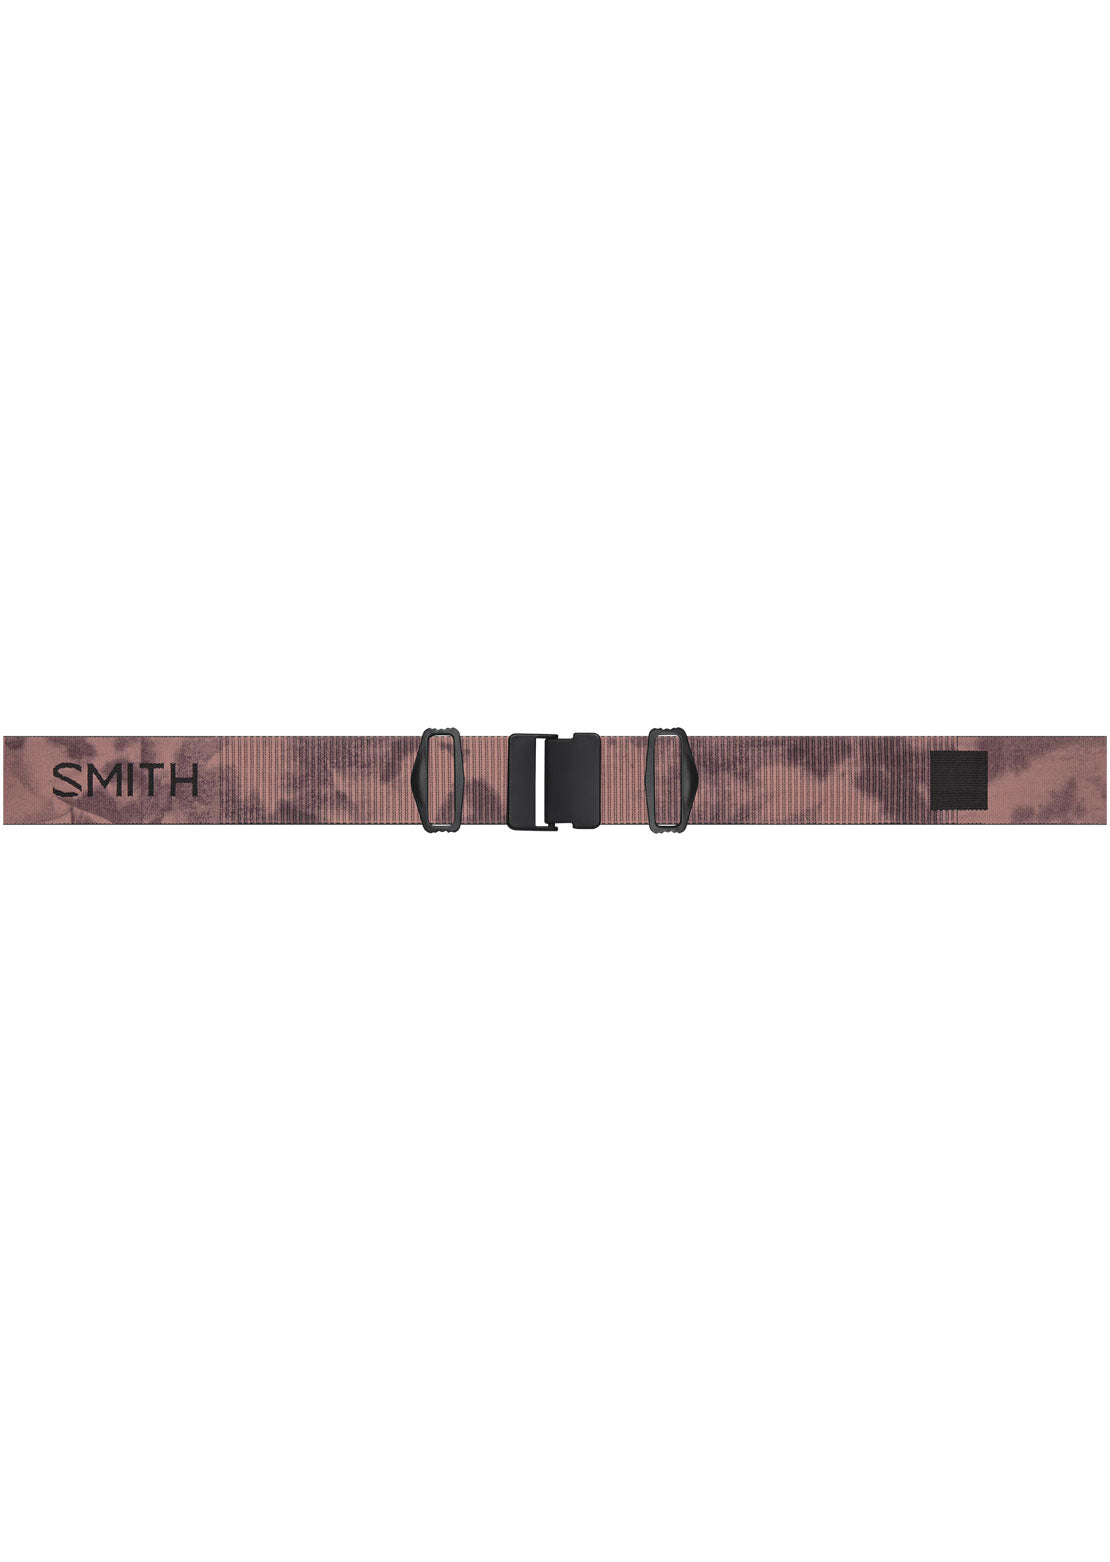 Smith I/O Mag Goggles Chalk Rose Bleached/ChromaPop Everyday Rose Gold Mirror